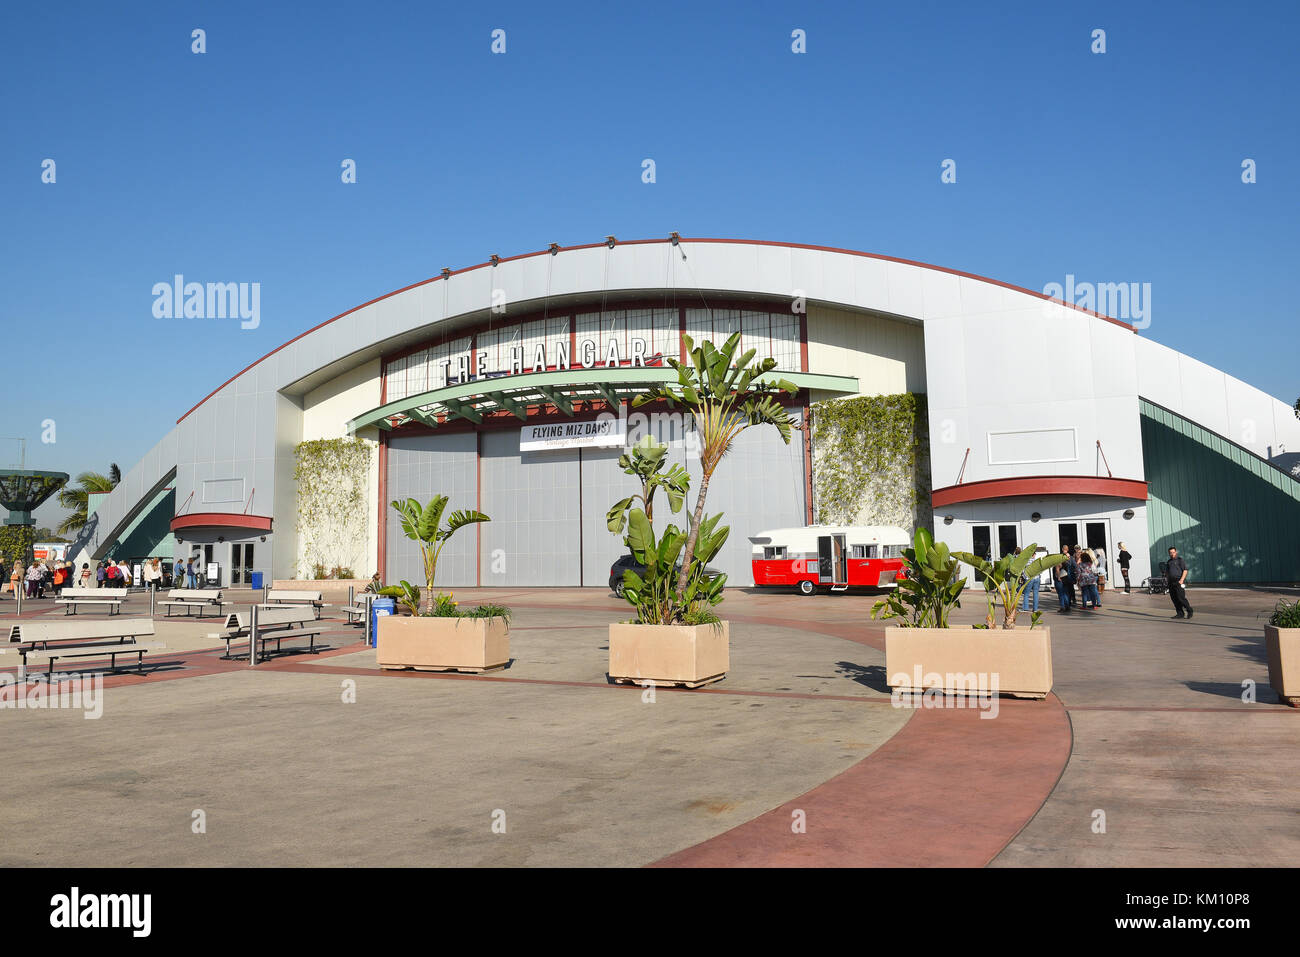 COSTA MESA, CA - DEC 1, 2017: The Hangar at the OC Fair and Event Center. The renovated airplane hangar hosts concerts and event throught the year. Stock Photo